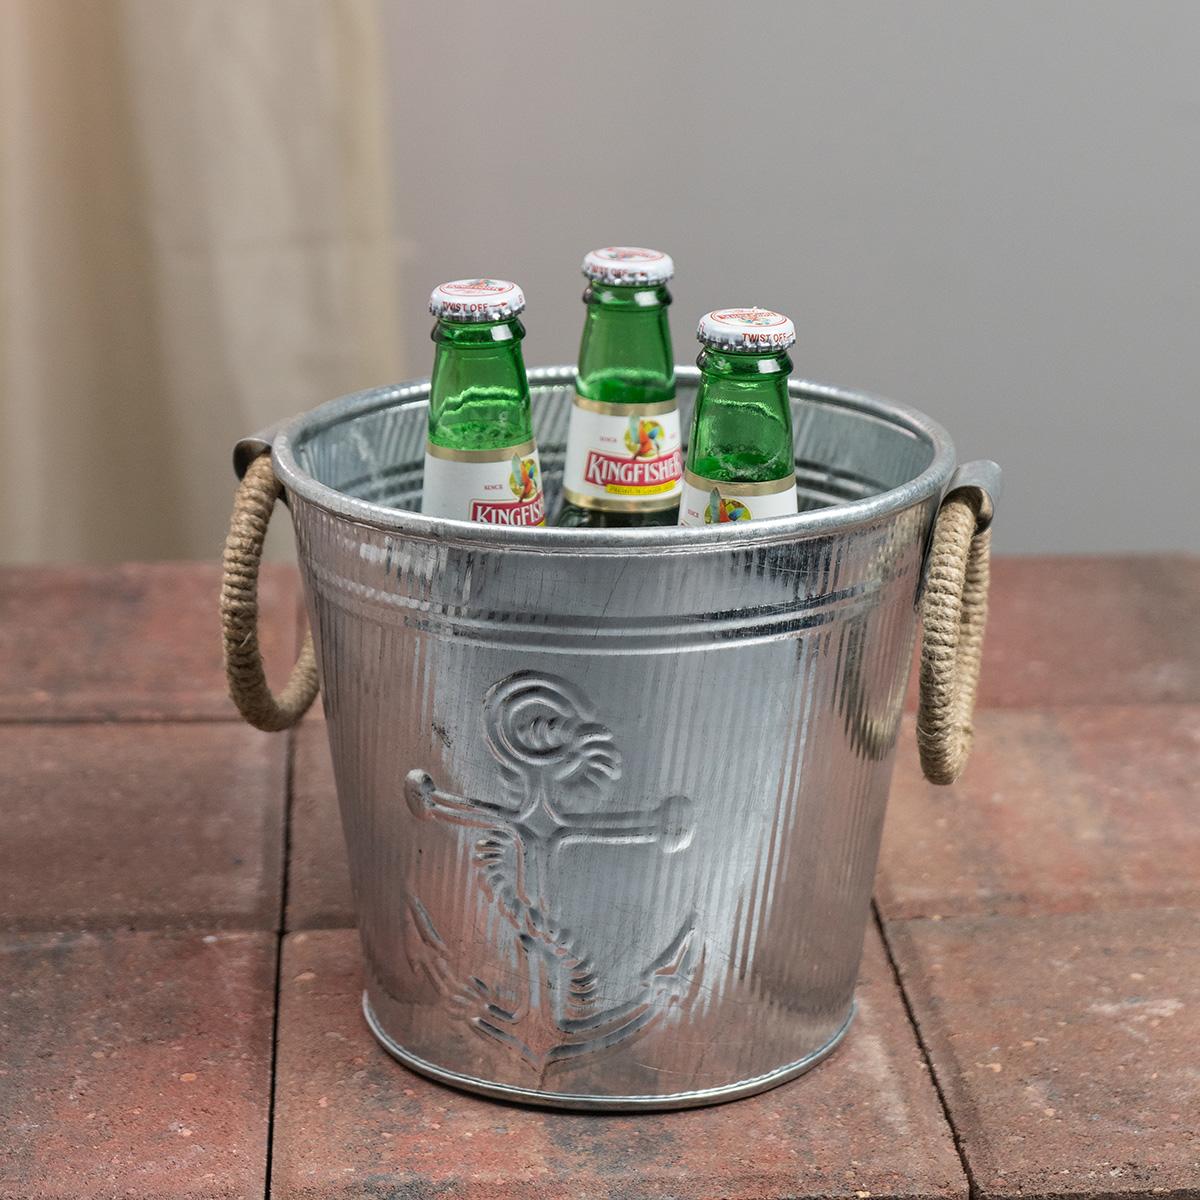 Galvanised metal ice bucket with rope handles and an anchor design, shown with kingfisher beer on a stone surface